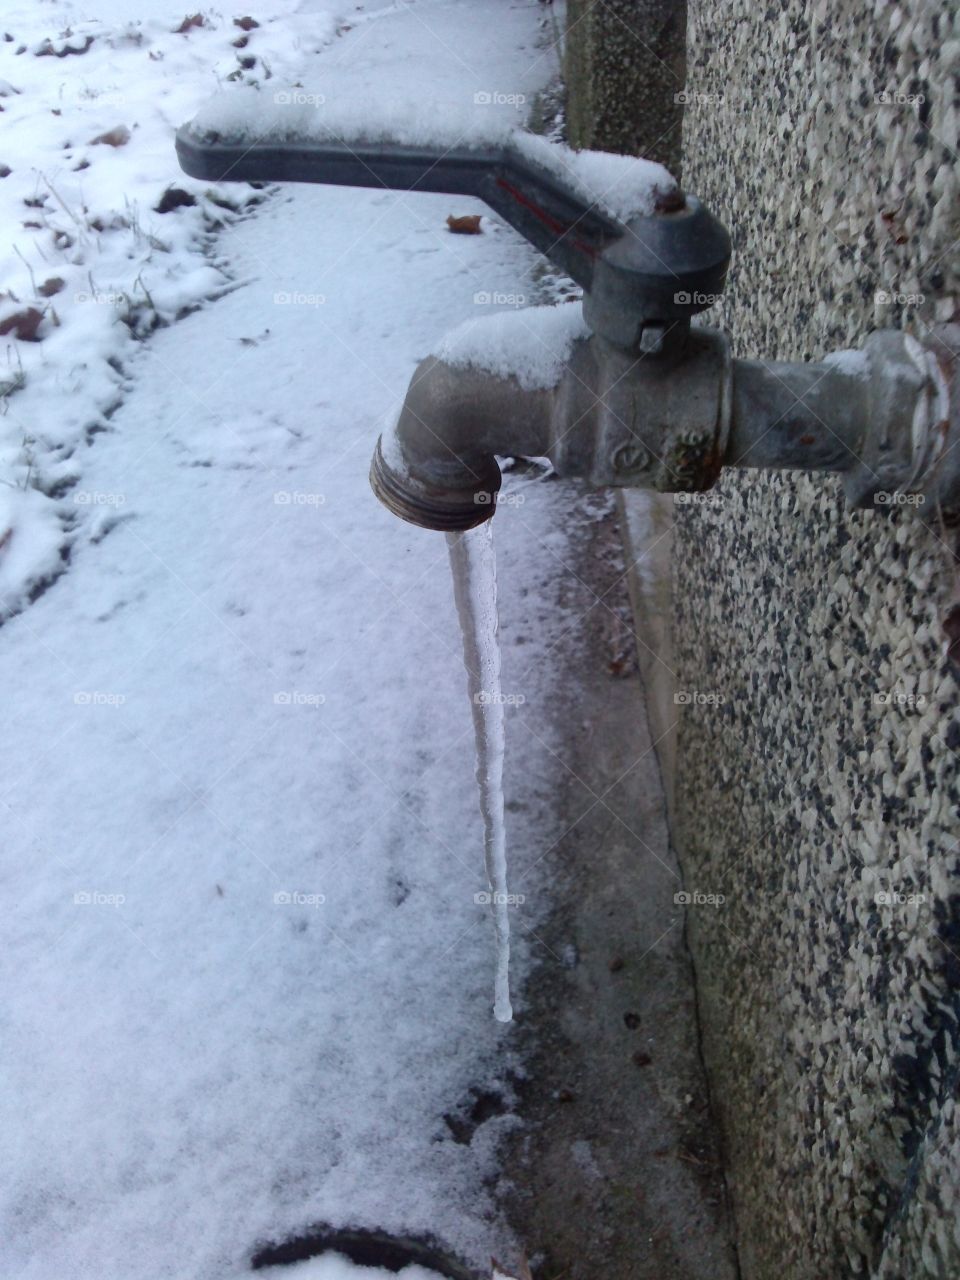 icy tap